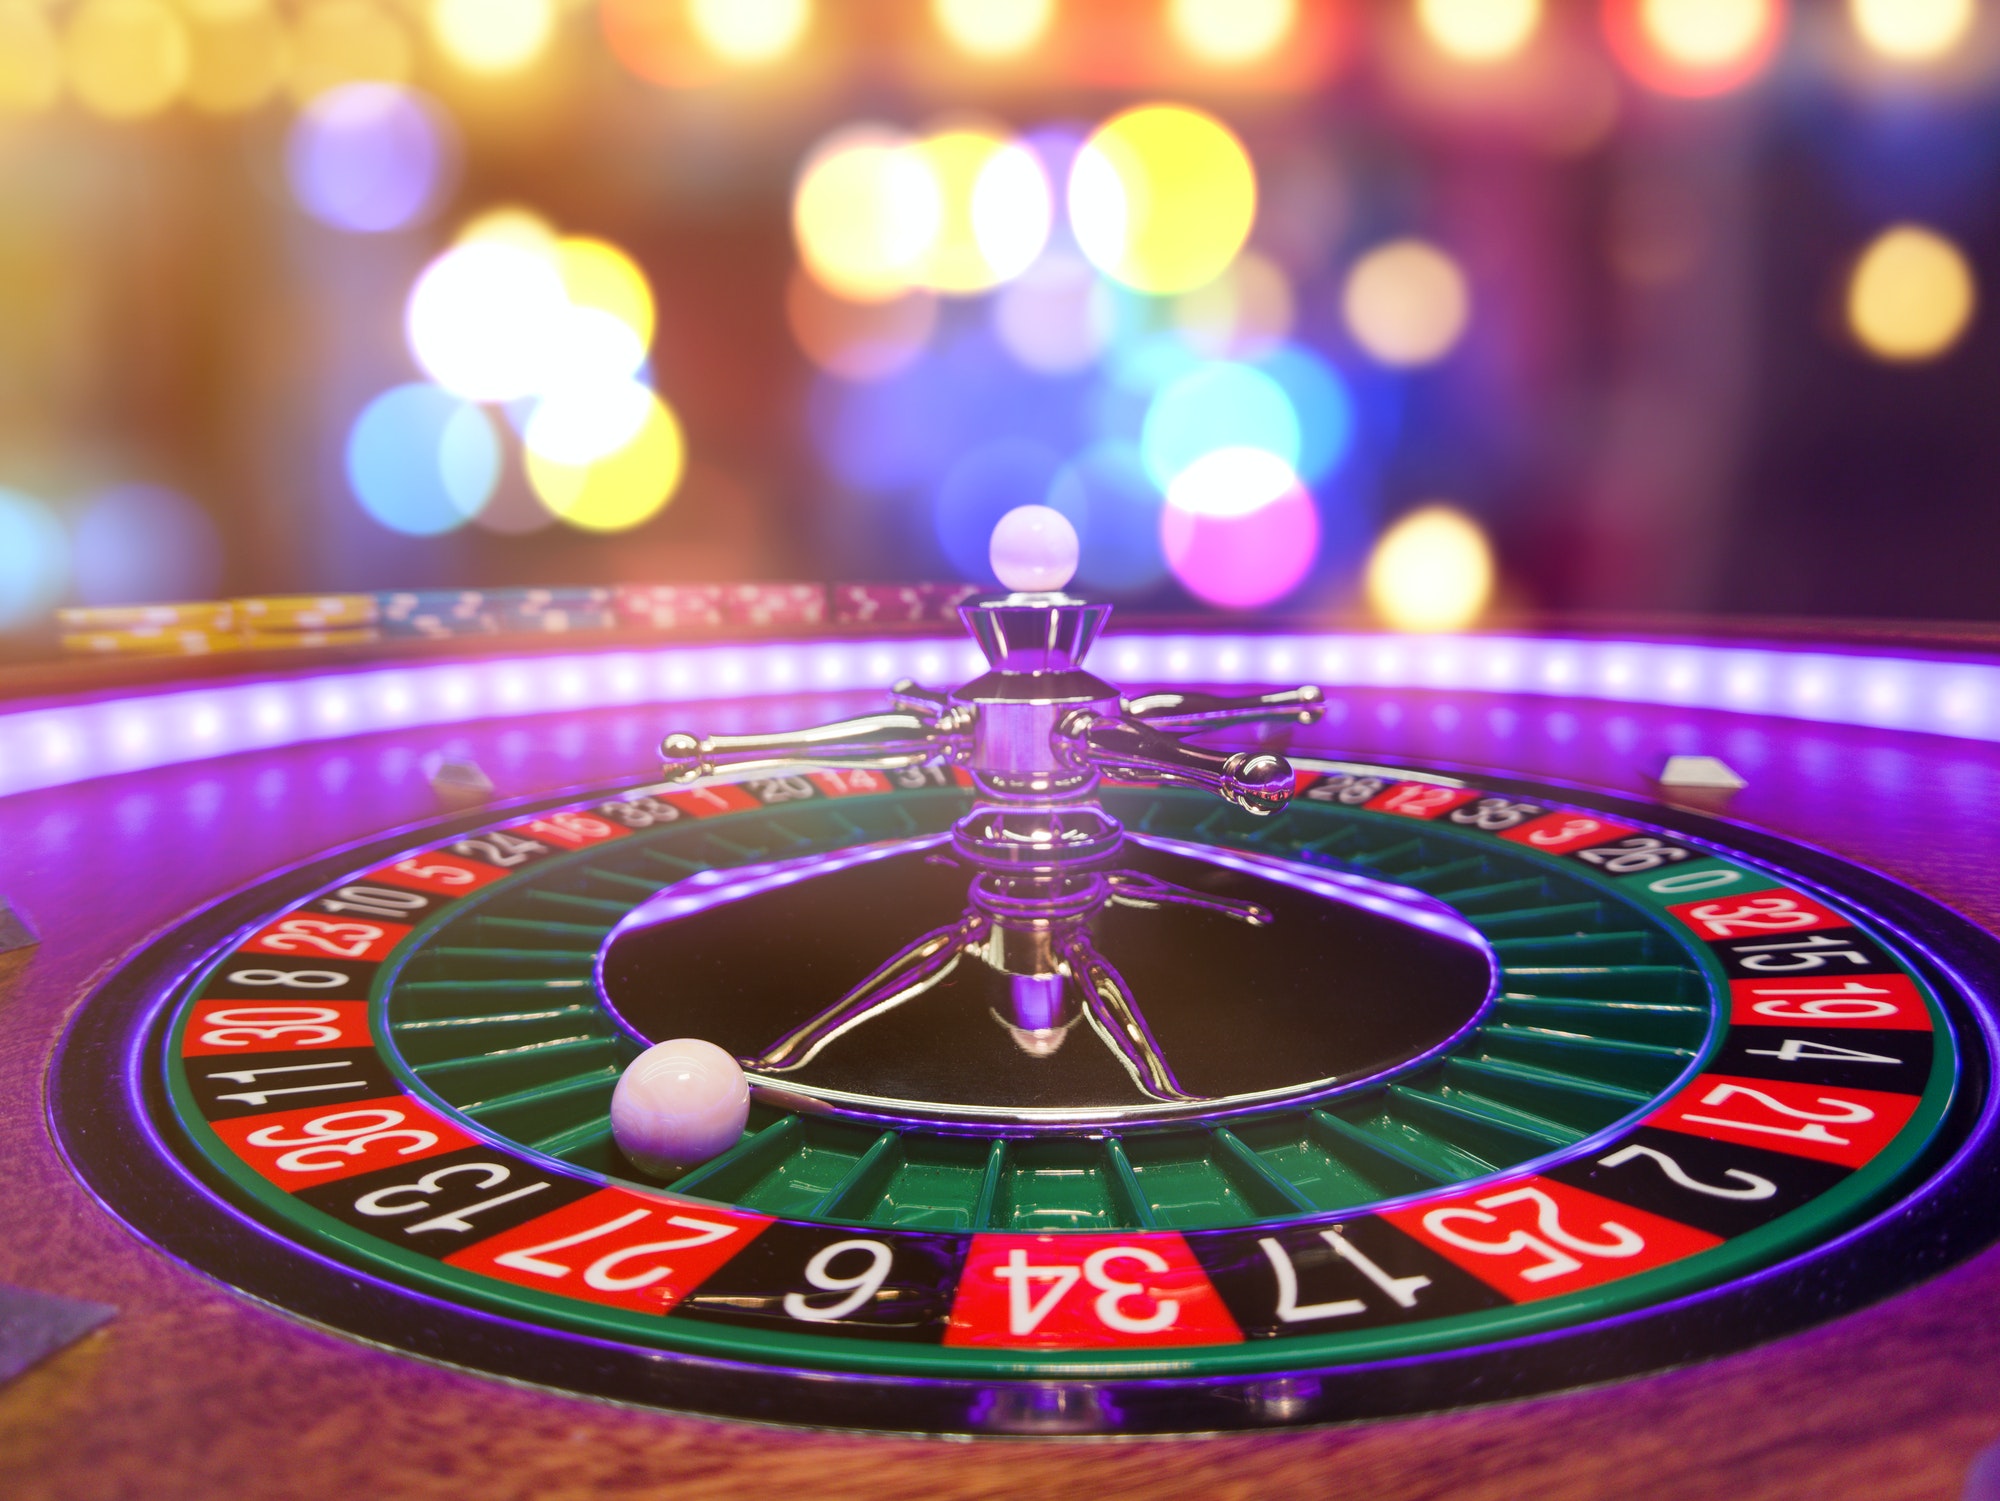 roulette-table-close-up-at-the-casino-1.jpg